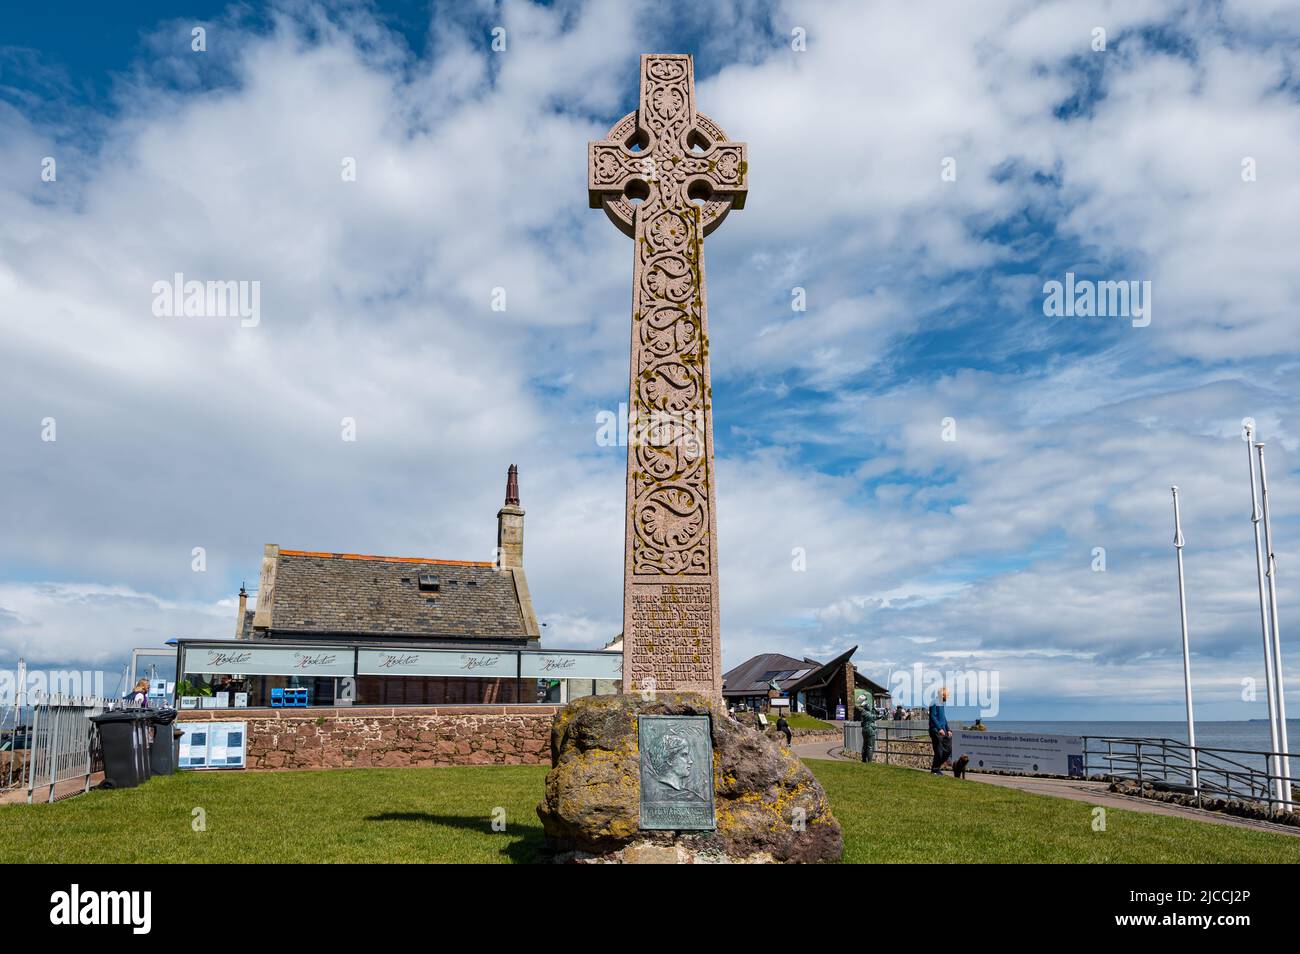 Celtic cross memorial for a girl who drowned while rescuing a drowning boy, North Berwick, East Lothian, Scotland, UK Stock Photo